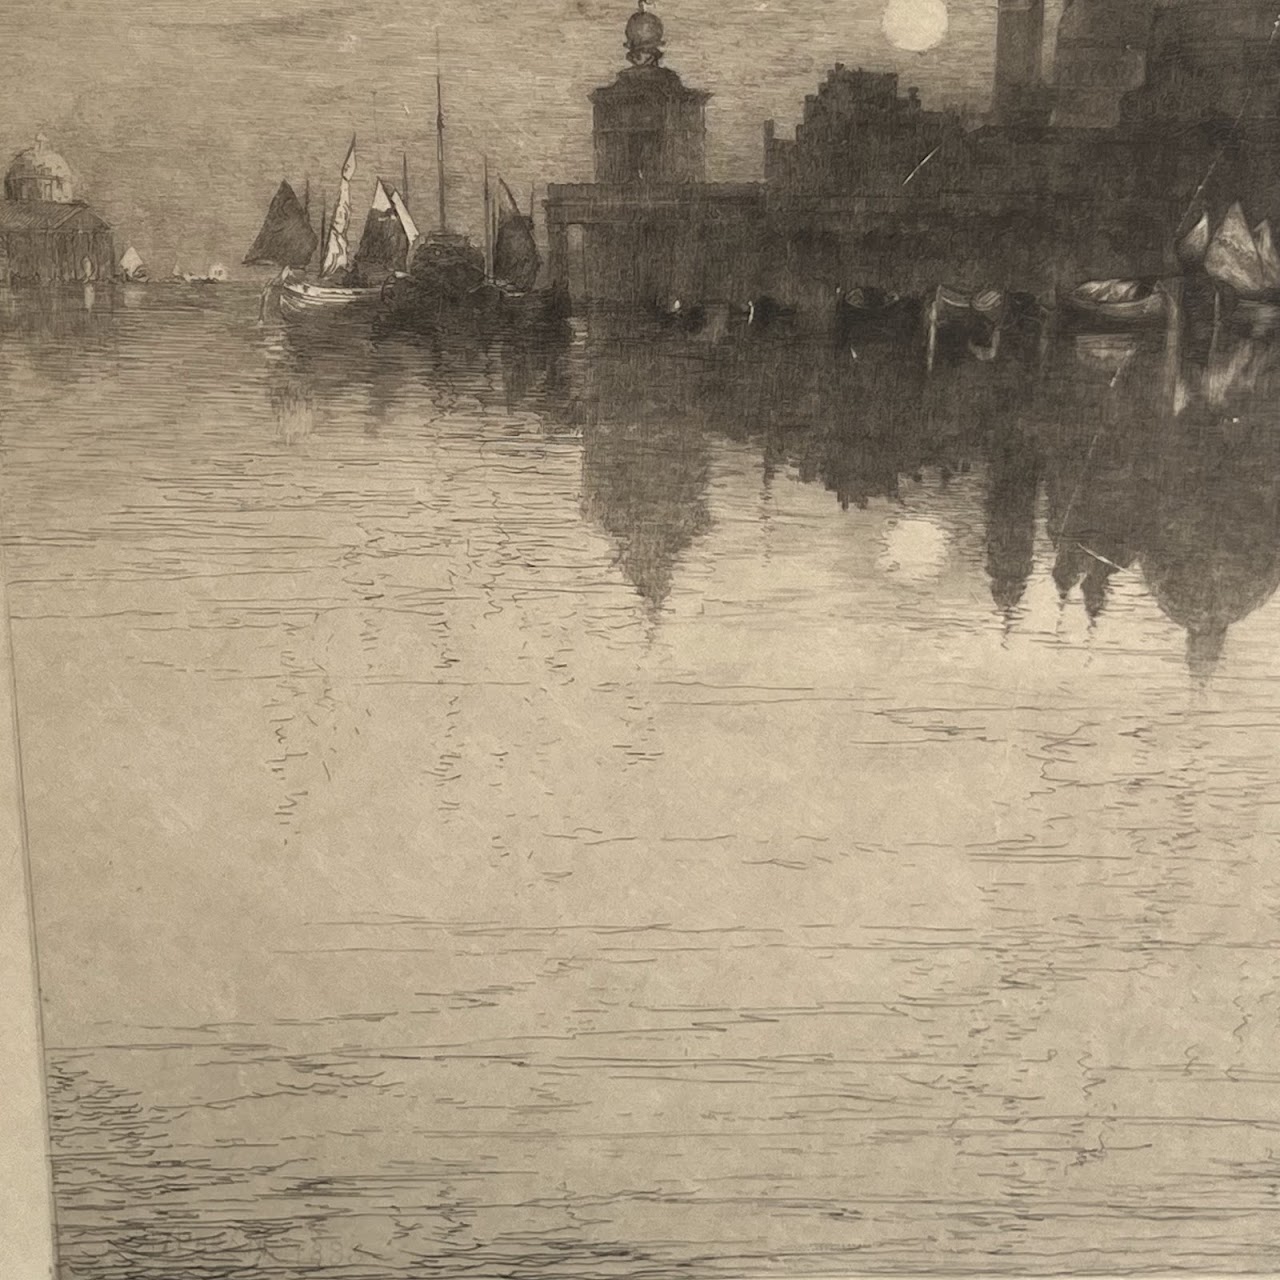 Thomas Moran 'The Gates of Venice' Signed 19th C. Etching